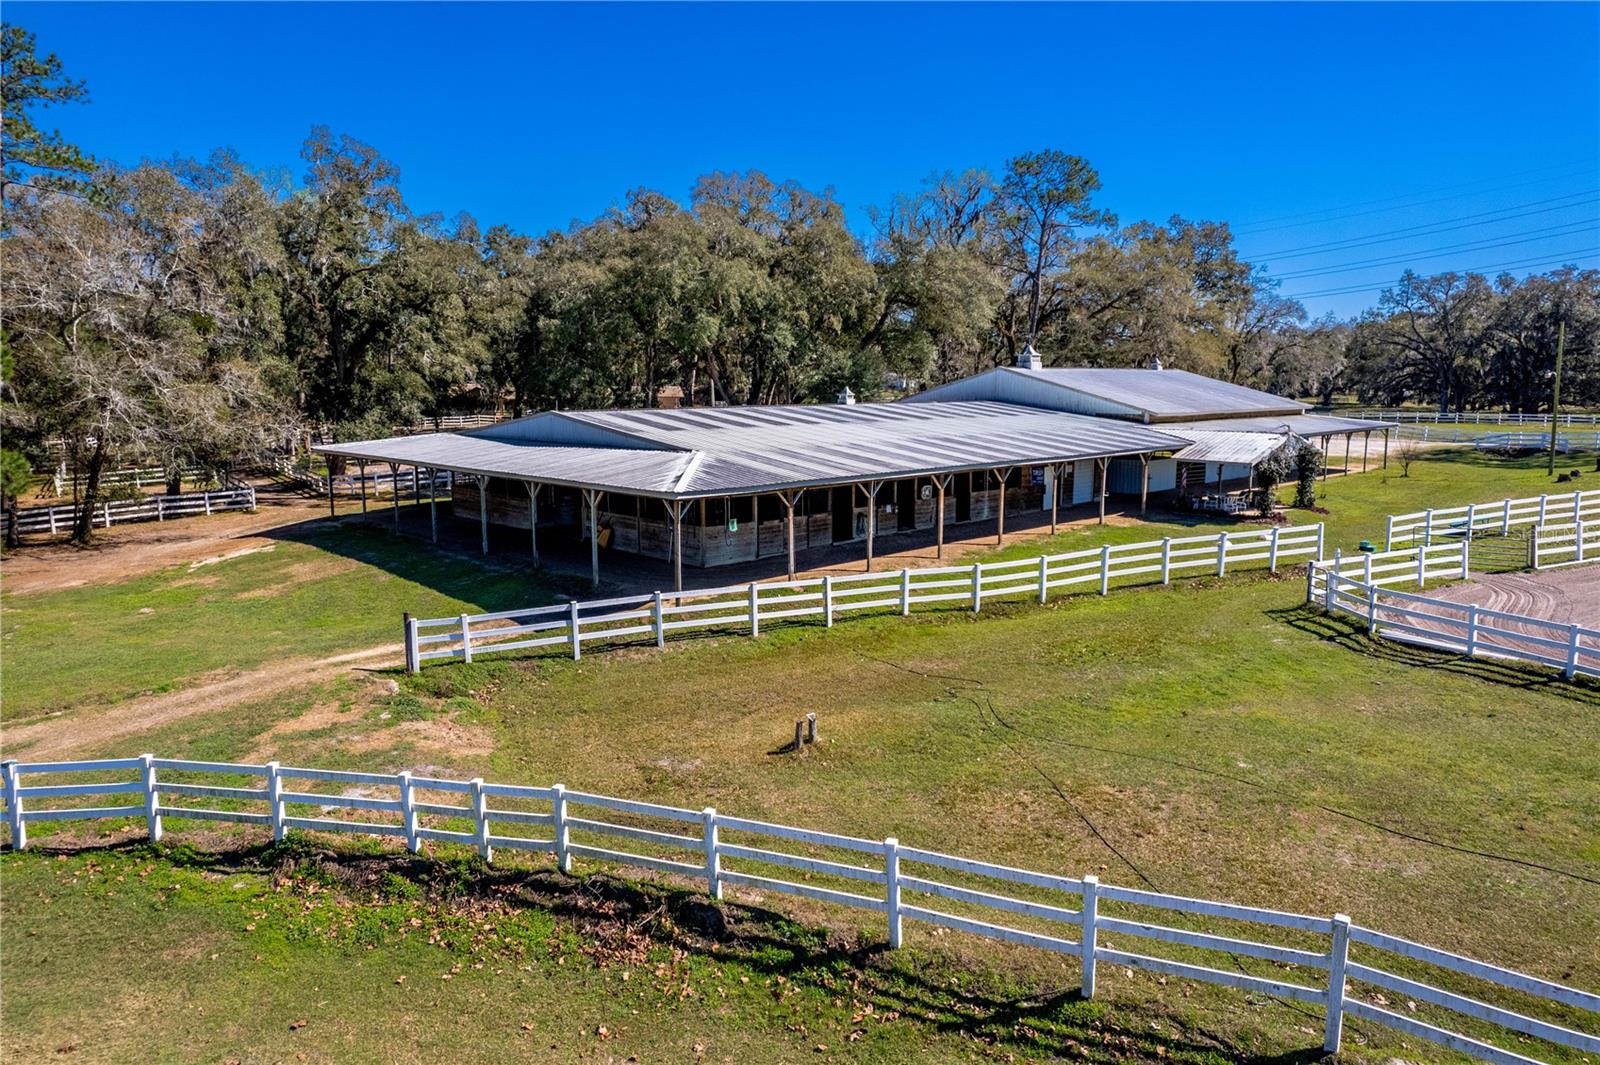 26 Stall Center Aisle Barn with Bathroom/Tack Room/ Feed Room/Covered Arena